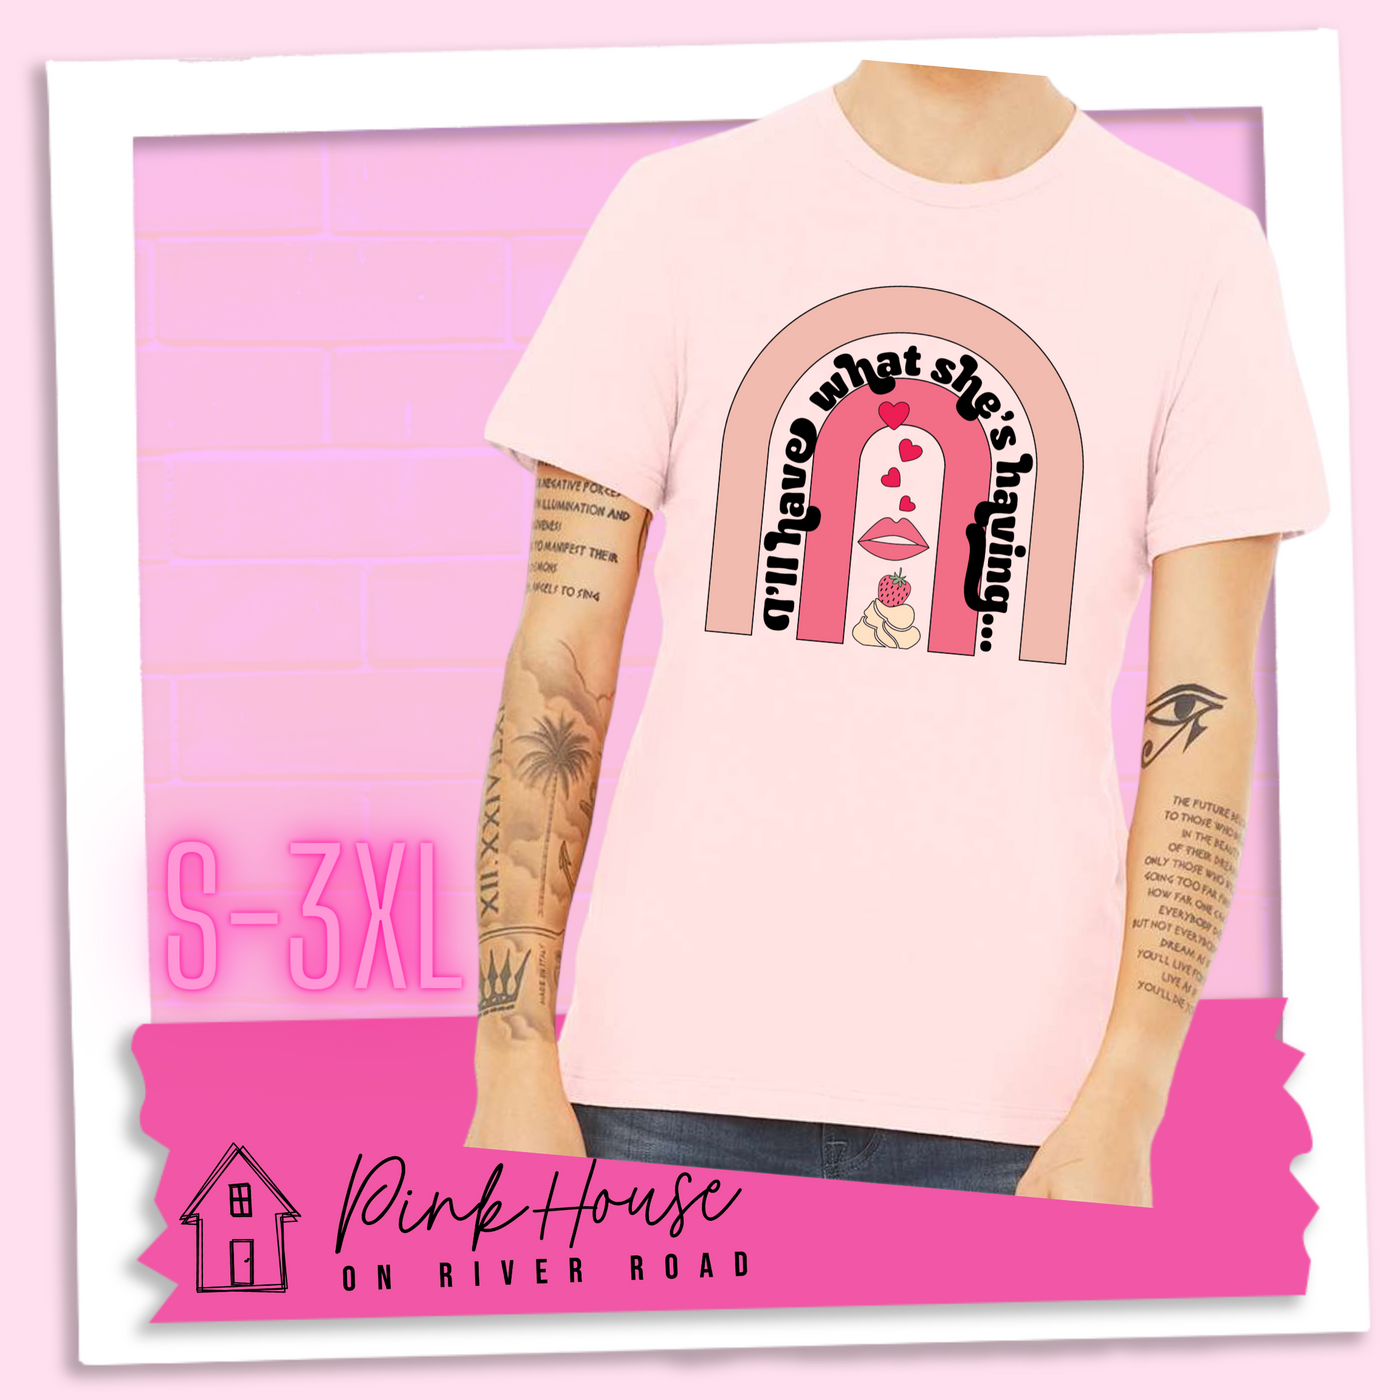 Soft Pink tee with a graphic of a strawberry dessert and a set of lips with hearts, there is a pink arch going over the art. There is a retro font arched over the pink art that says "I'll have what she's having..." in black with another arch above that in light pink.